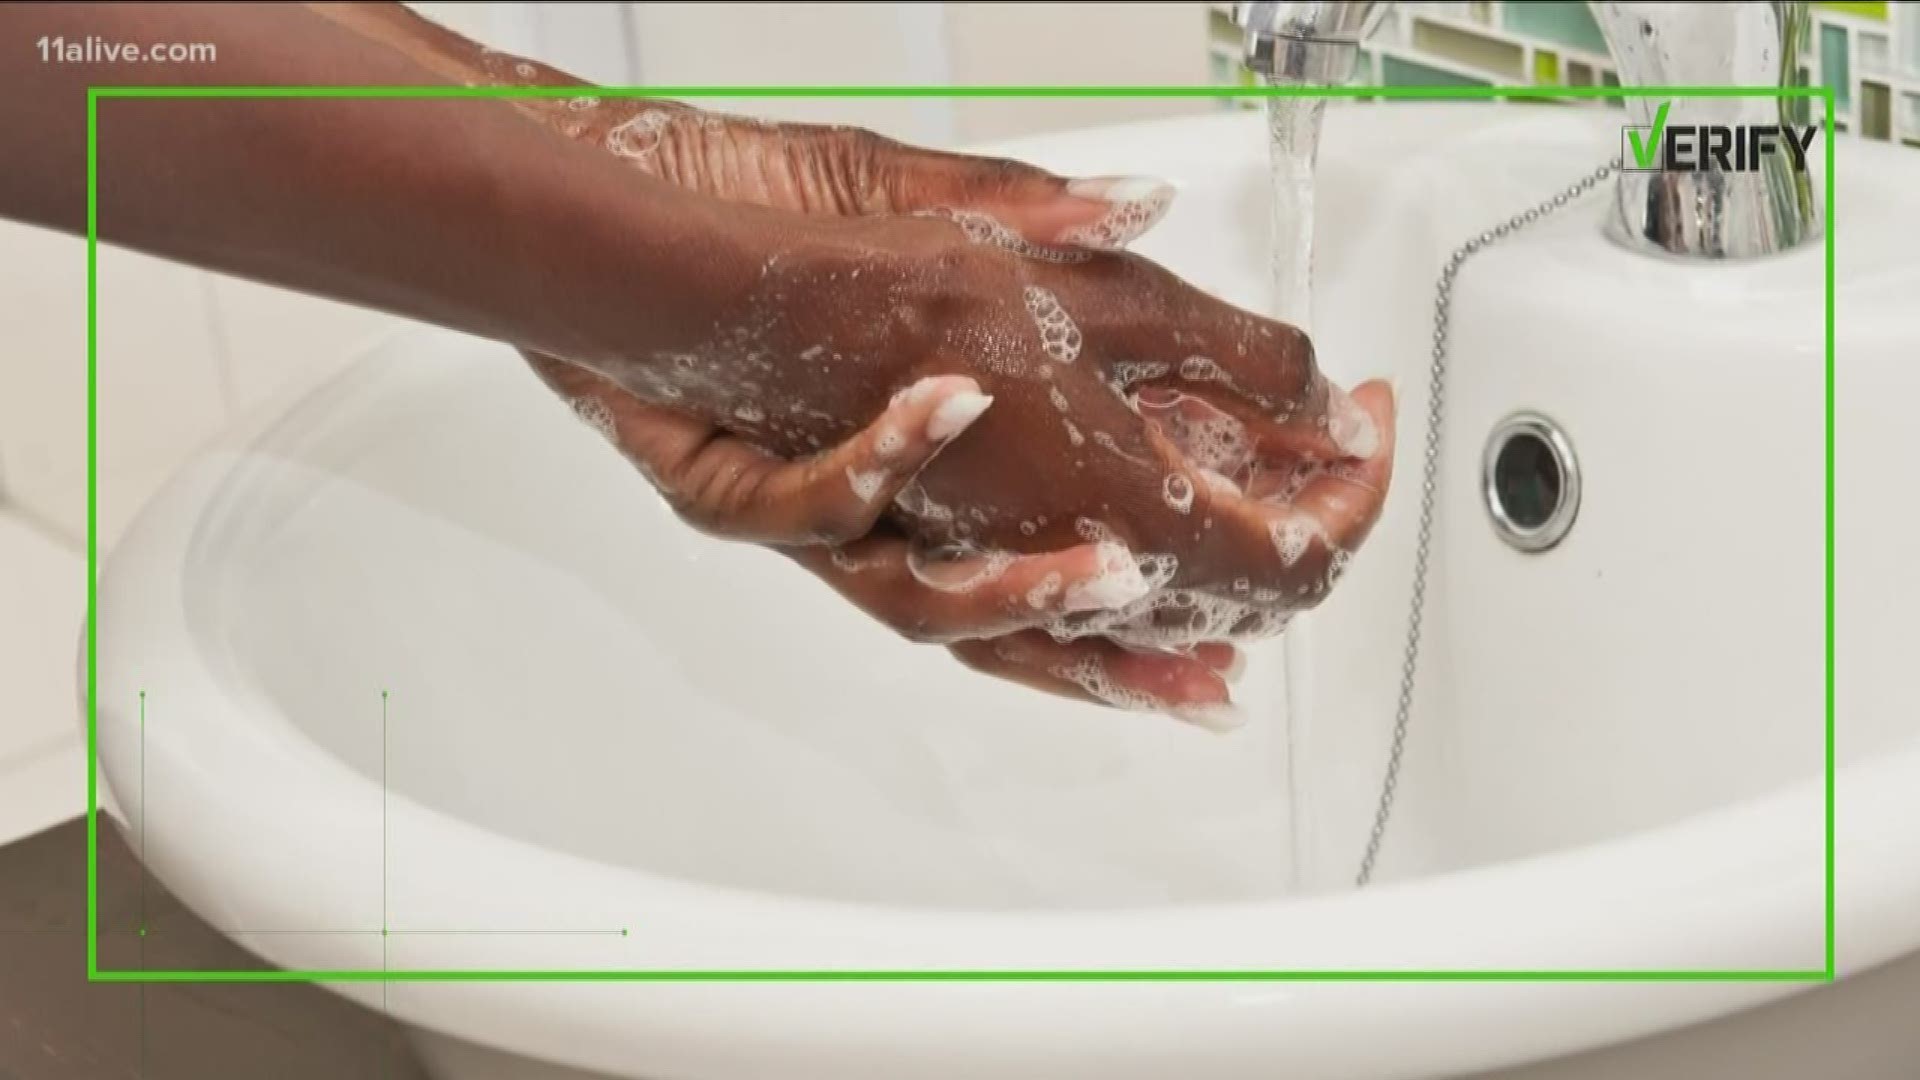 Hand-washing to avoid germs, illness - Mayo Clinic Health System